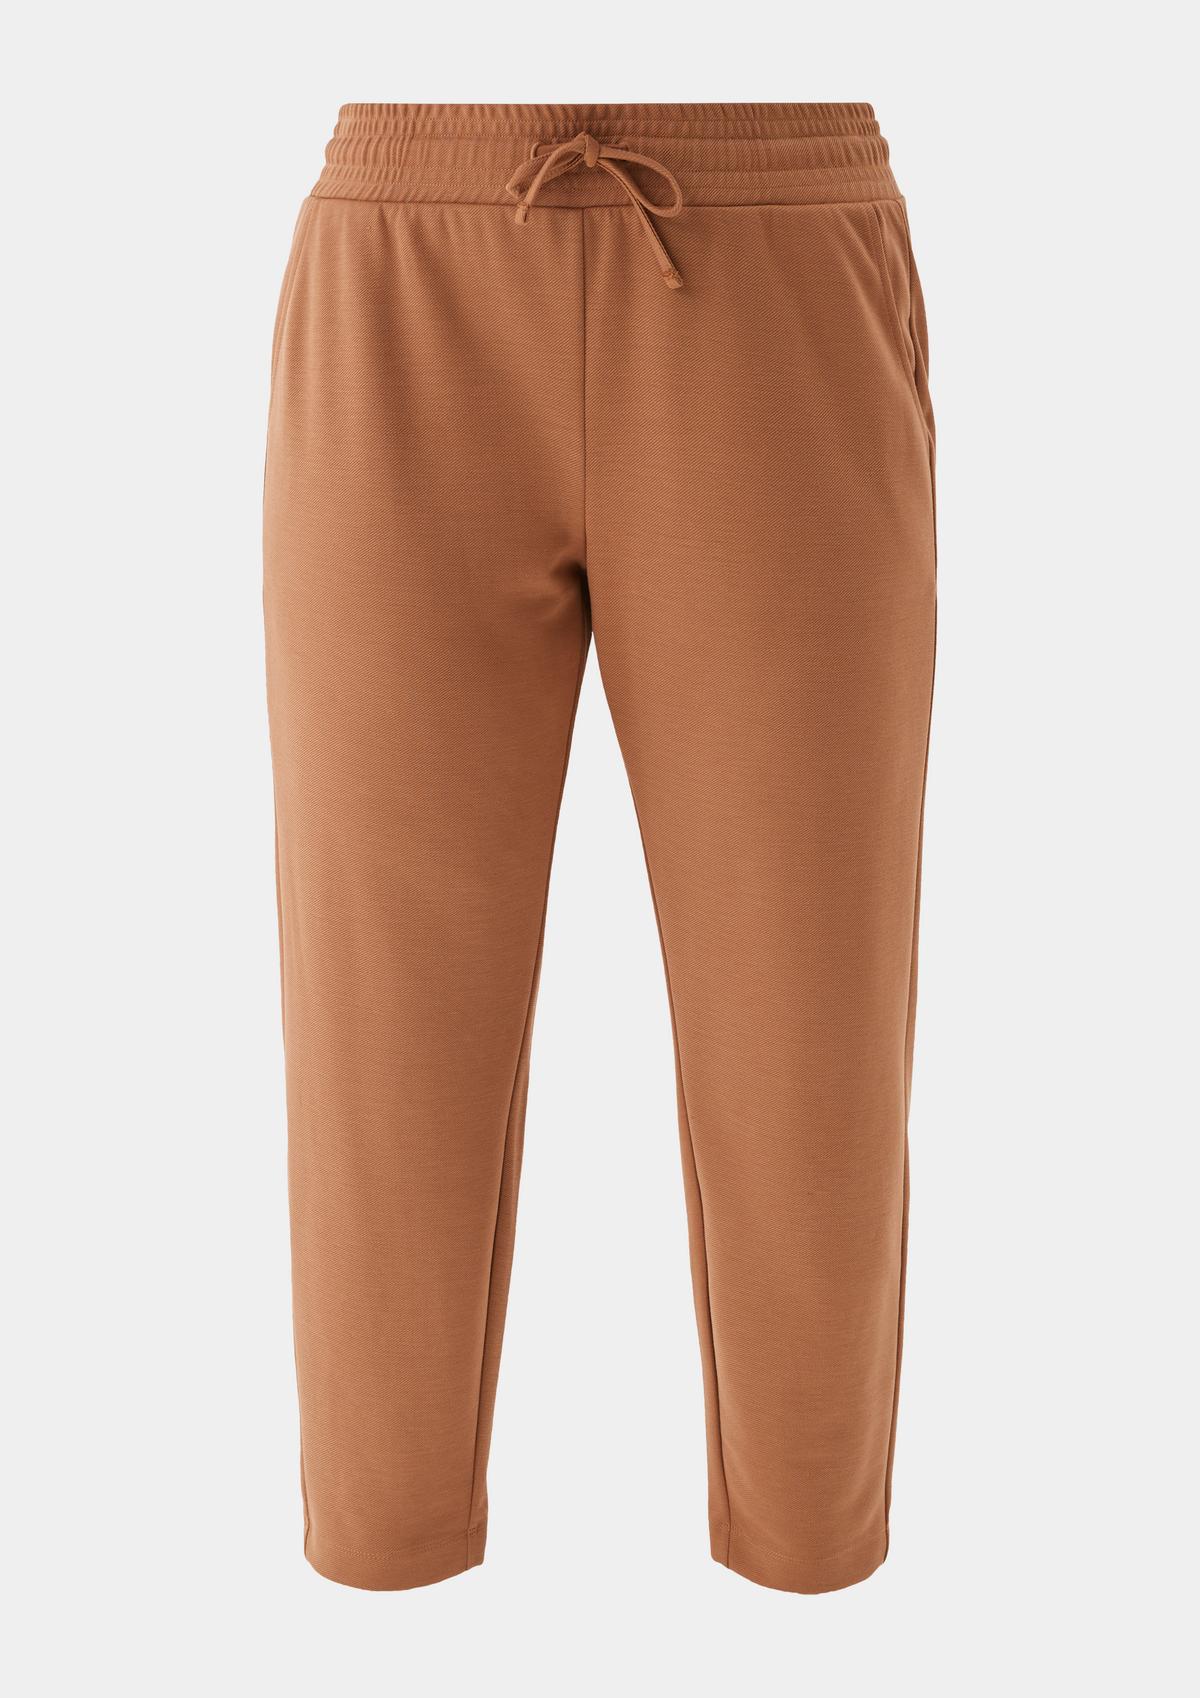 s.Oliver Tracksuit bottoms with a drawstring tie